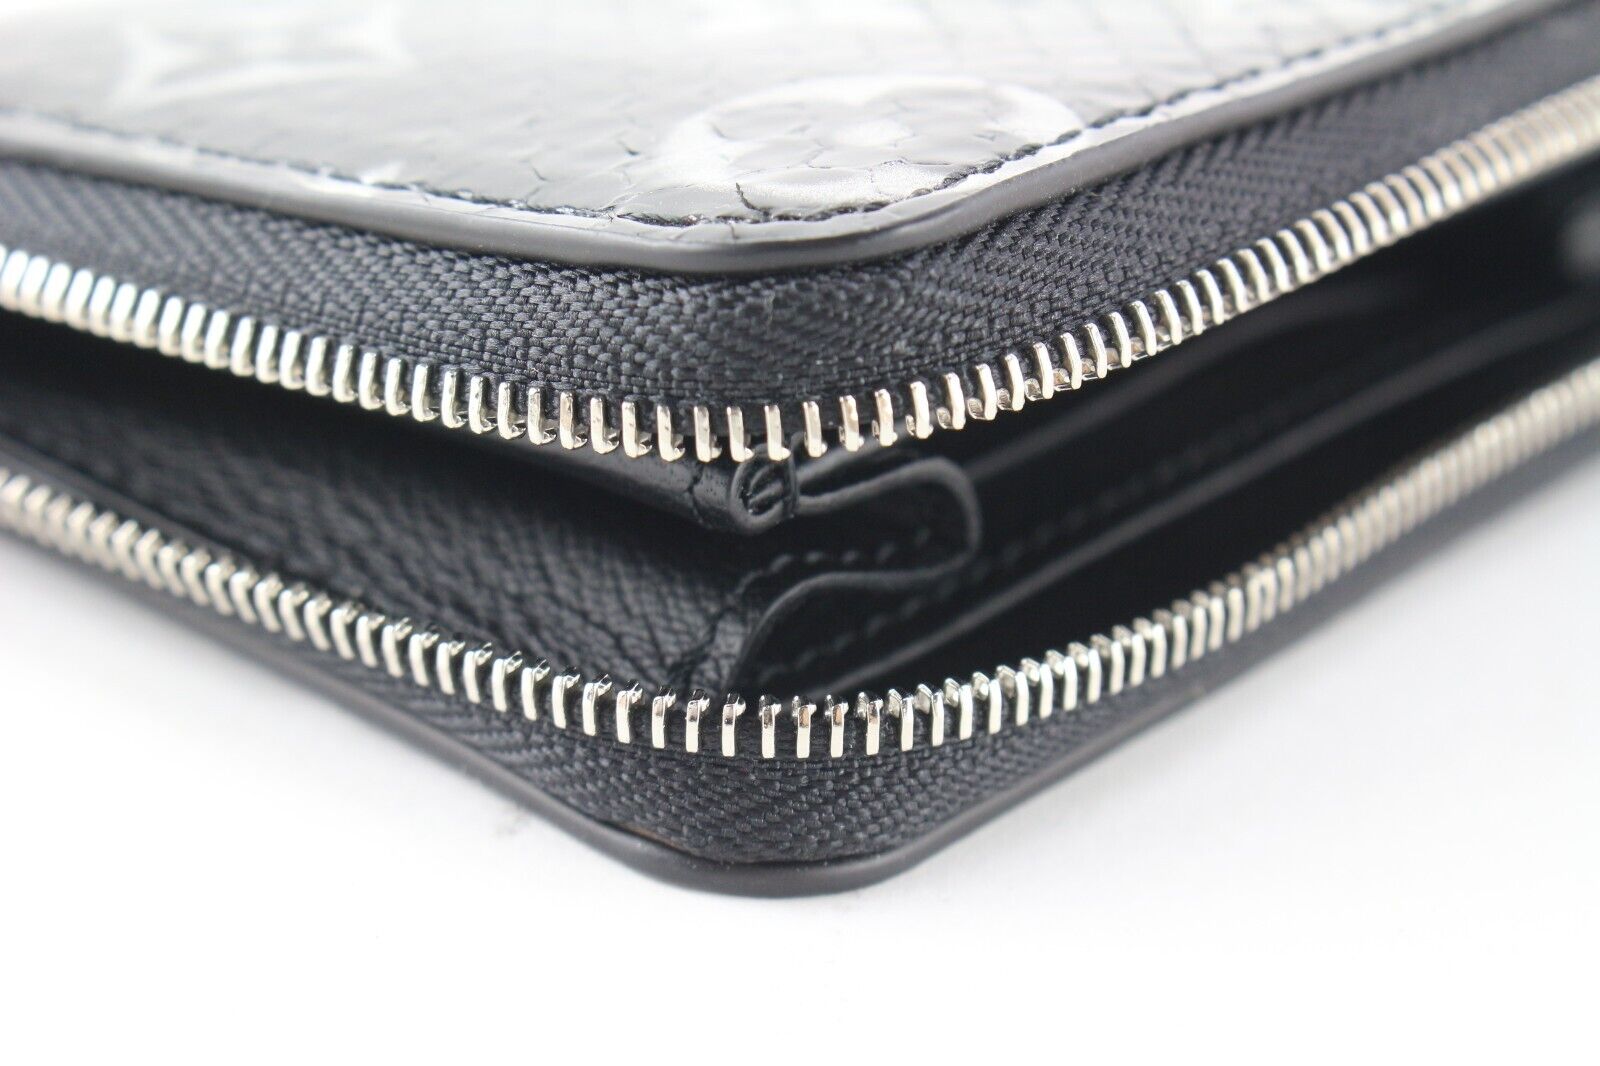 Zippy Coin Purse Padlock Python Leather - Wallets and Small Leather Goods